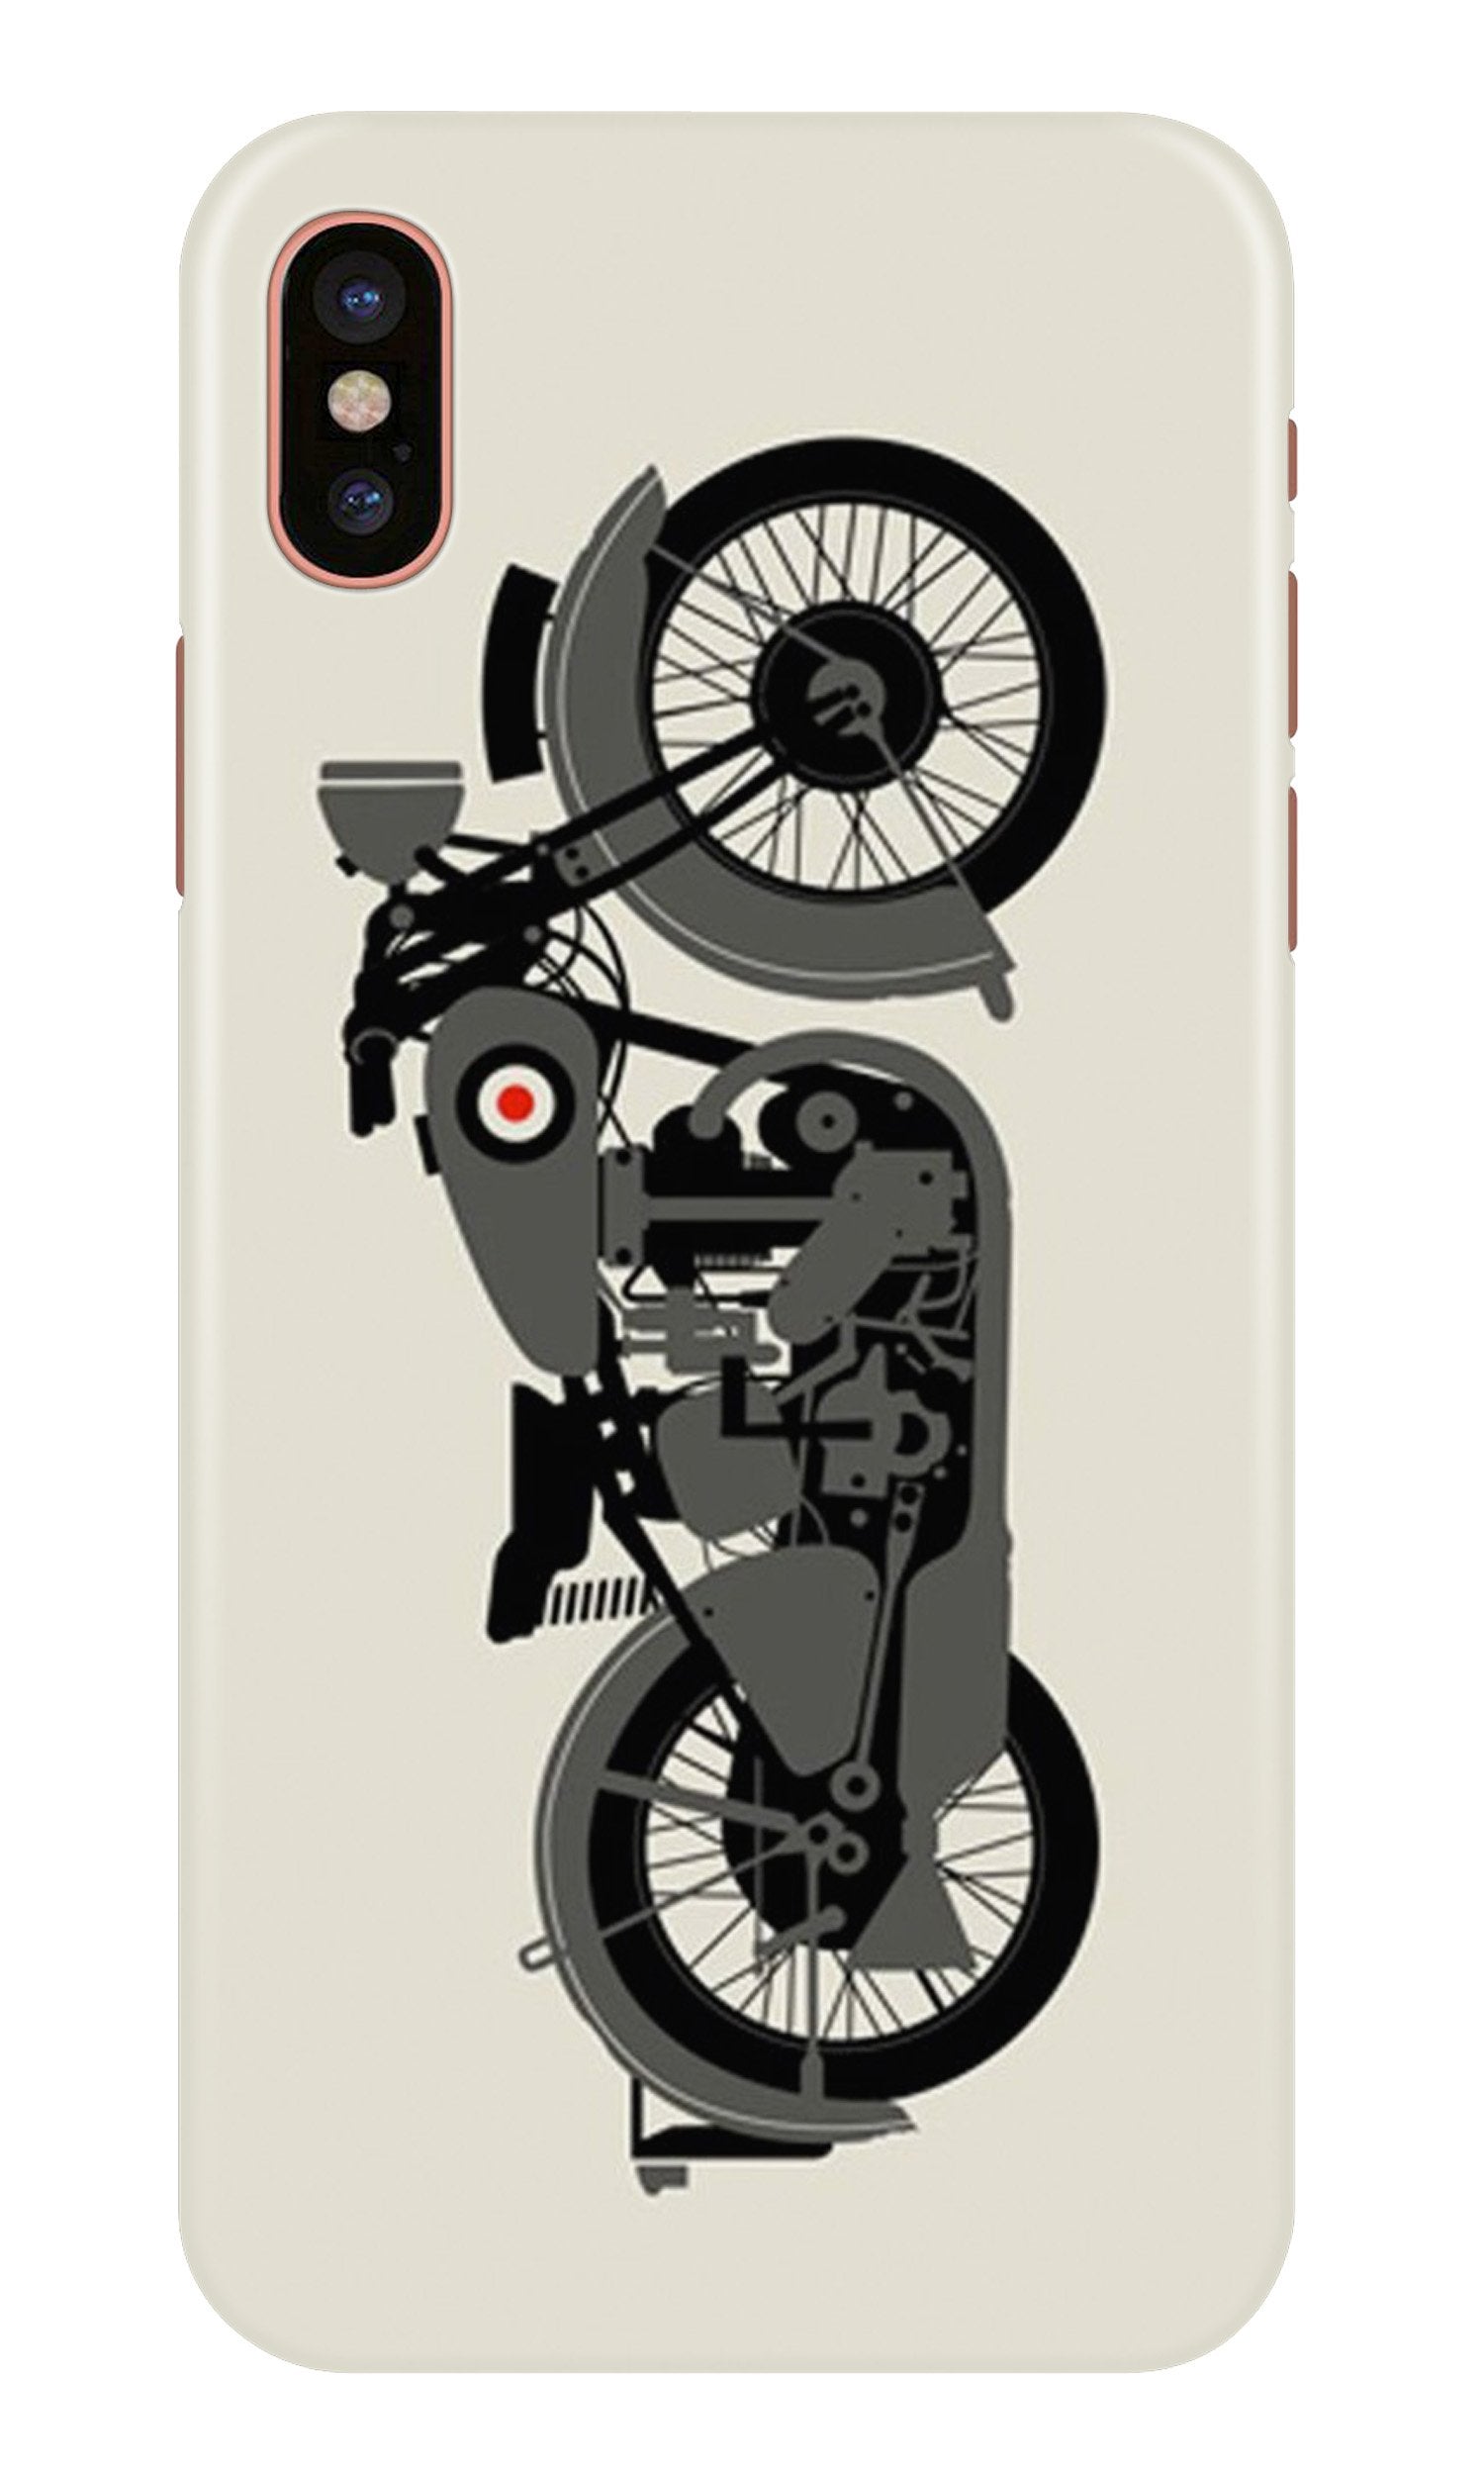 MotorCycle Case for iPhone Xs Max (Design No. 259)